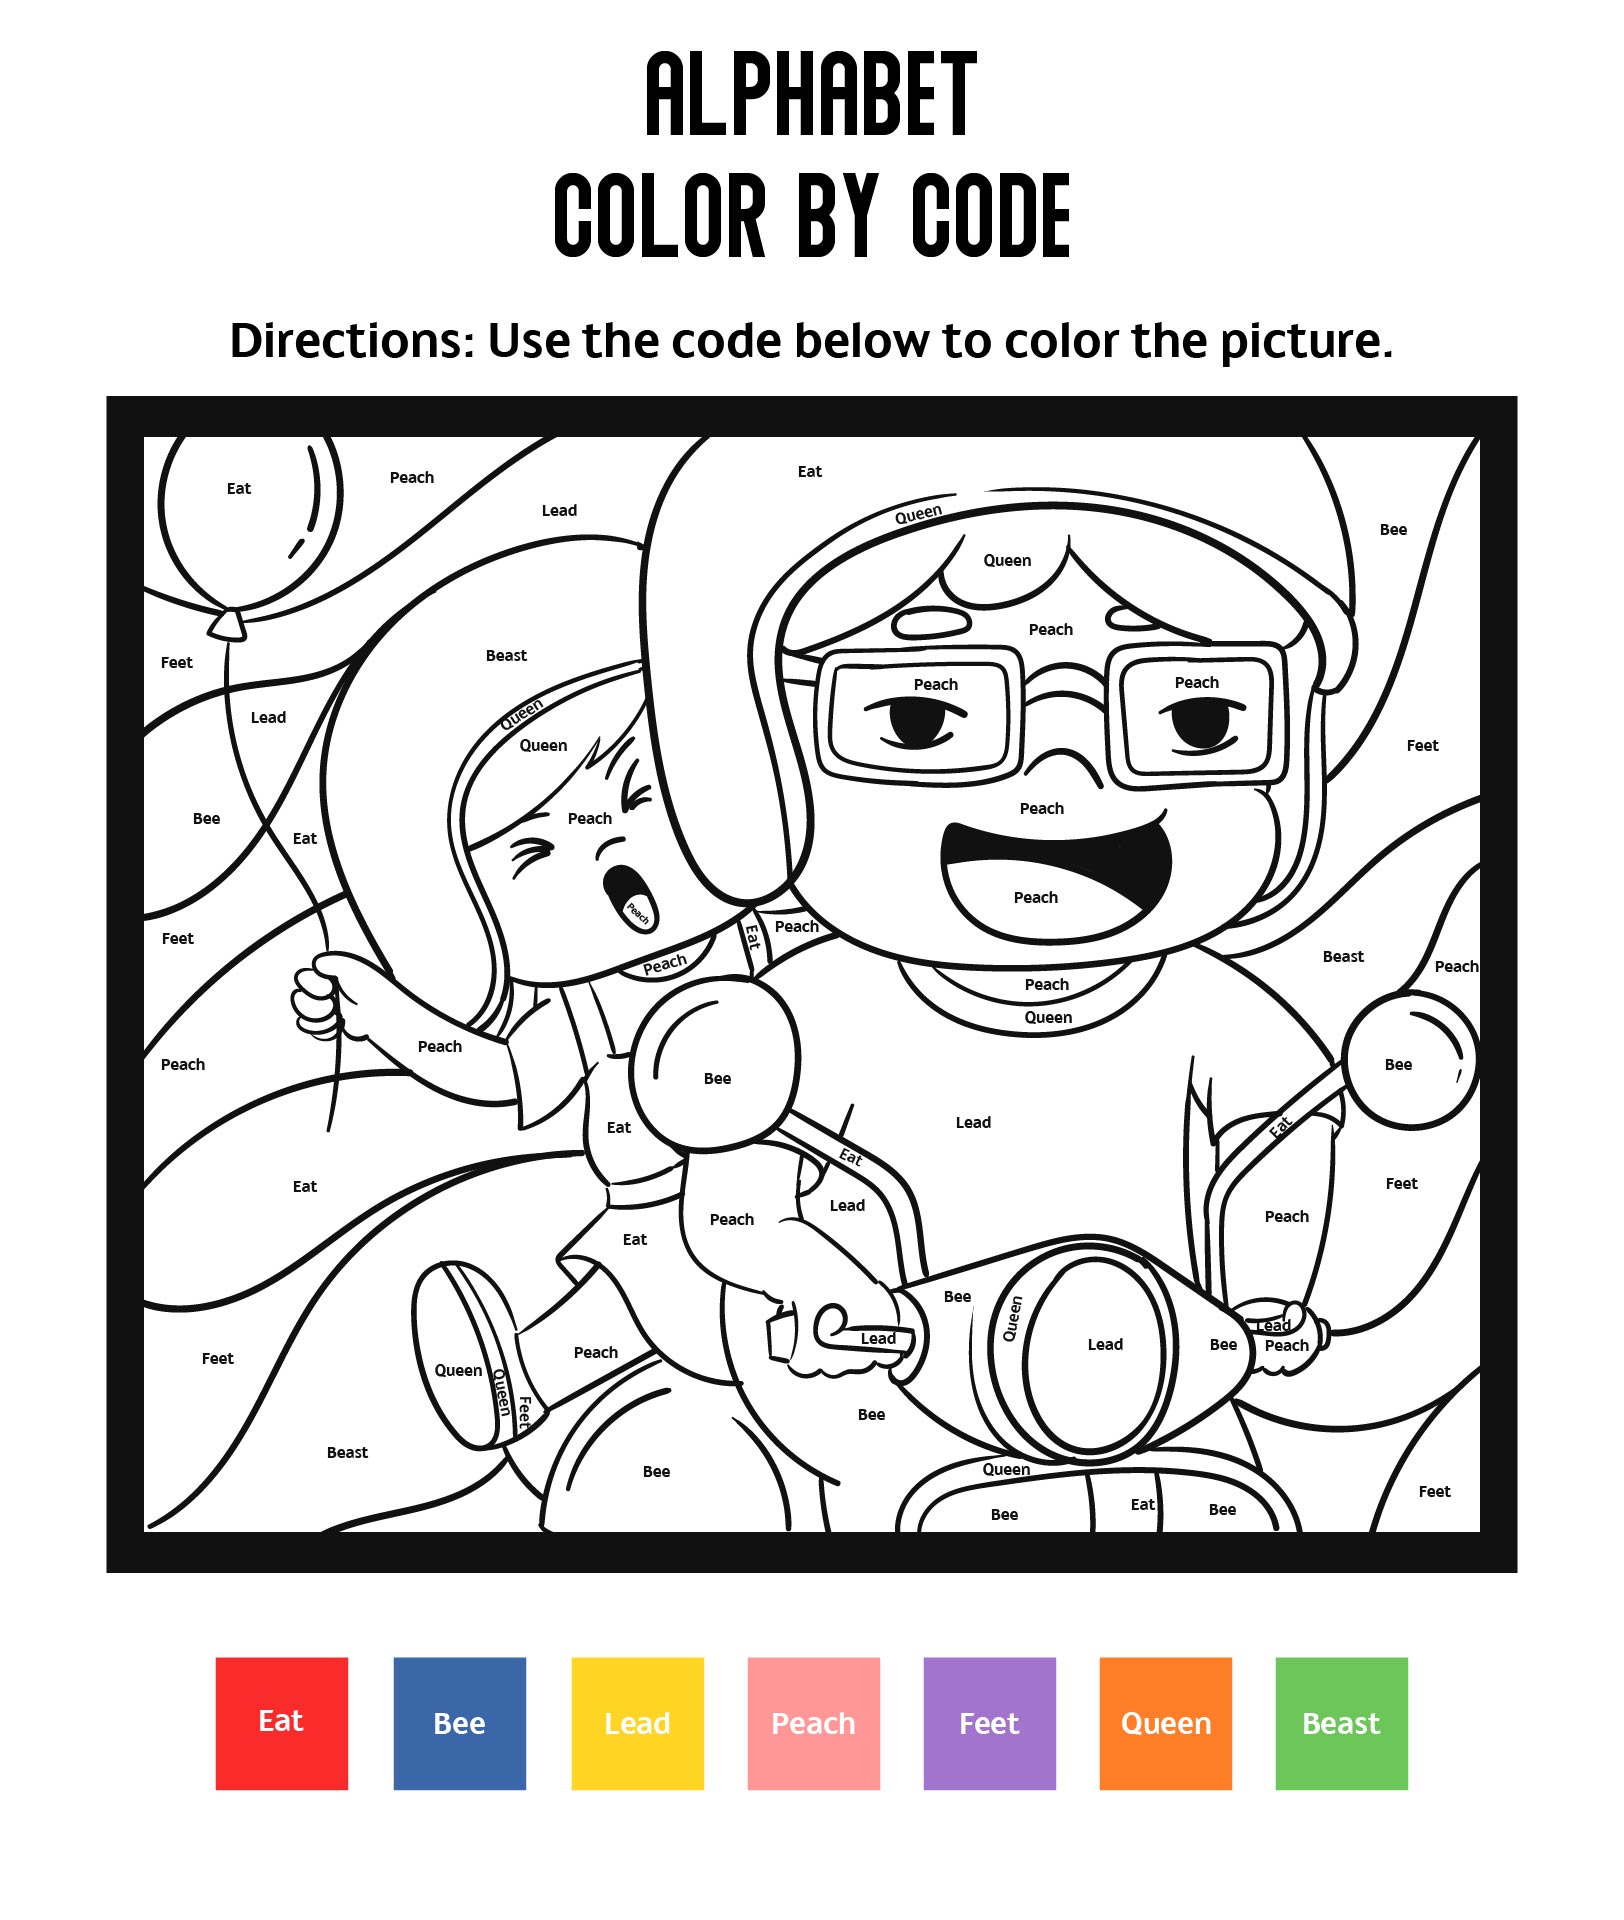 Color by Word Family Worksheets